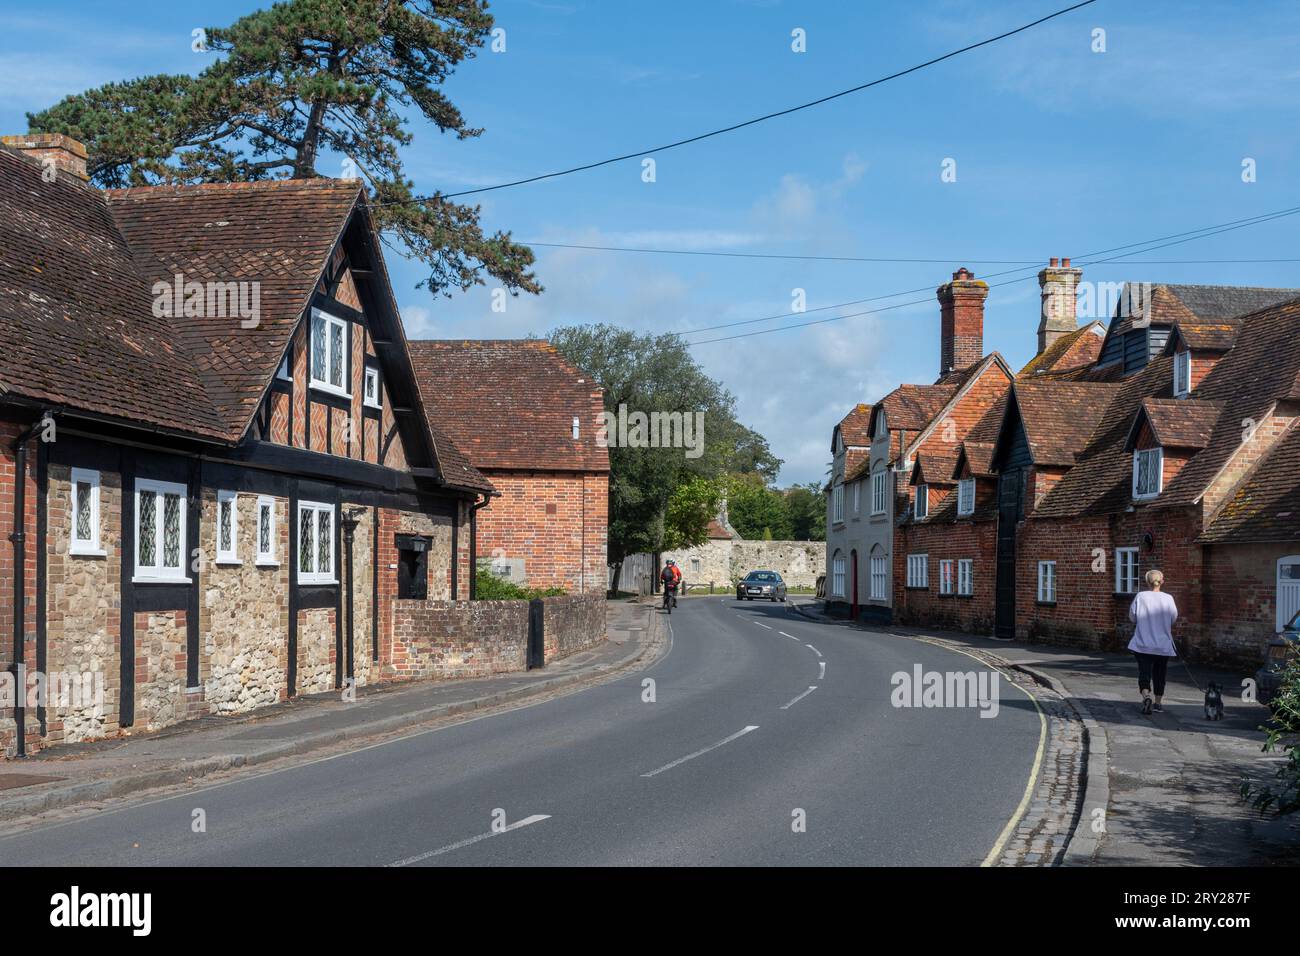 Beaulieu village in the New Forest, Hampshire, England, UK - street view with Beaulieu Mill on the right and cyclists Stock Photo